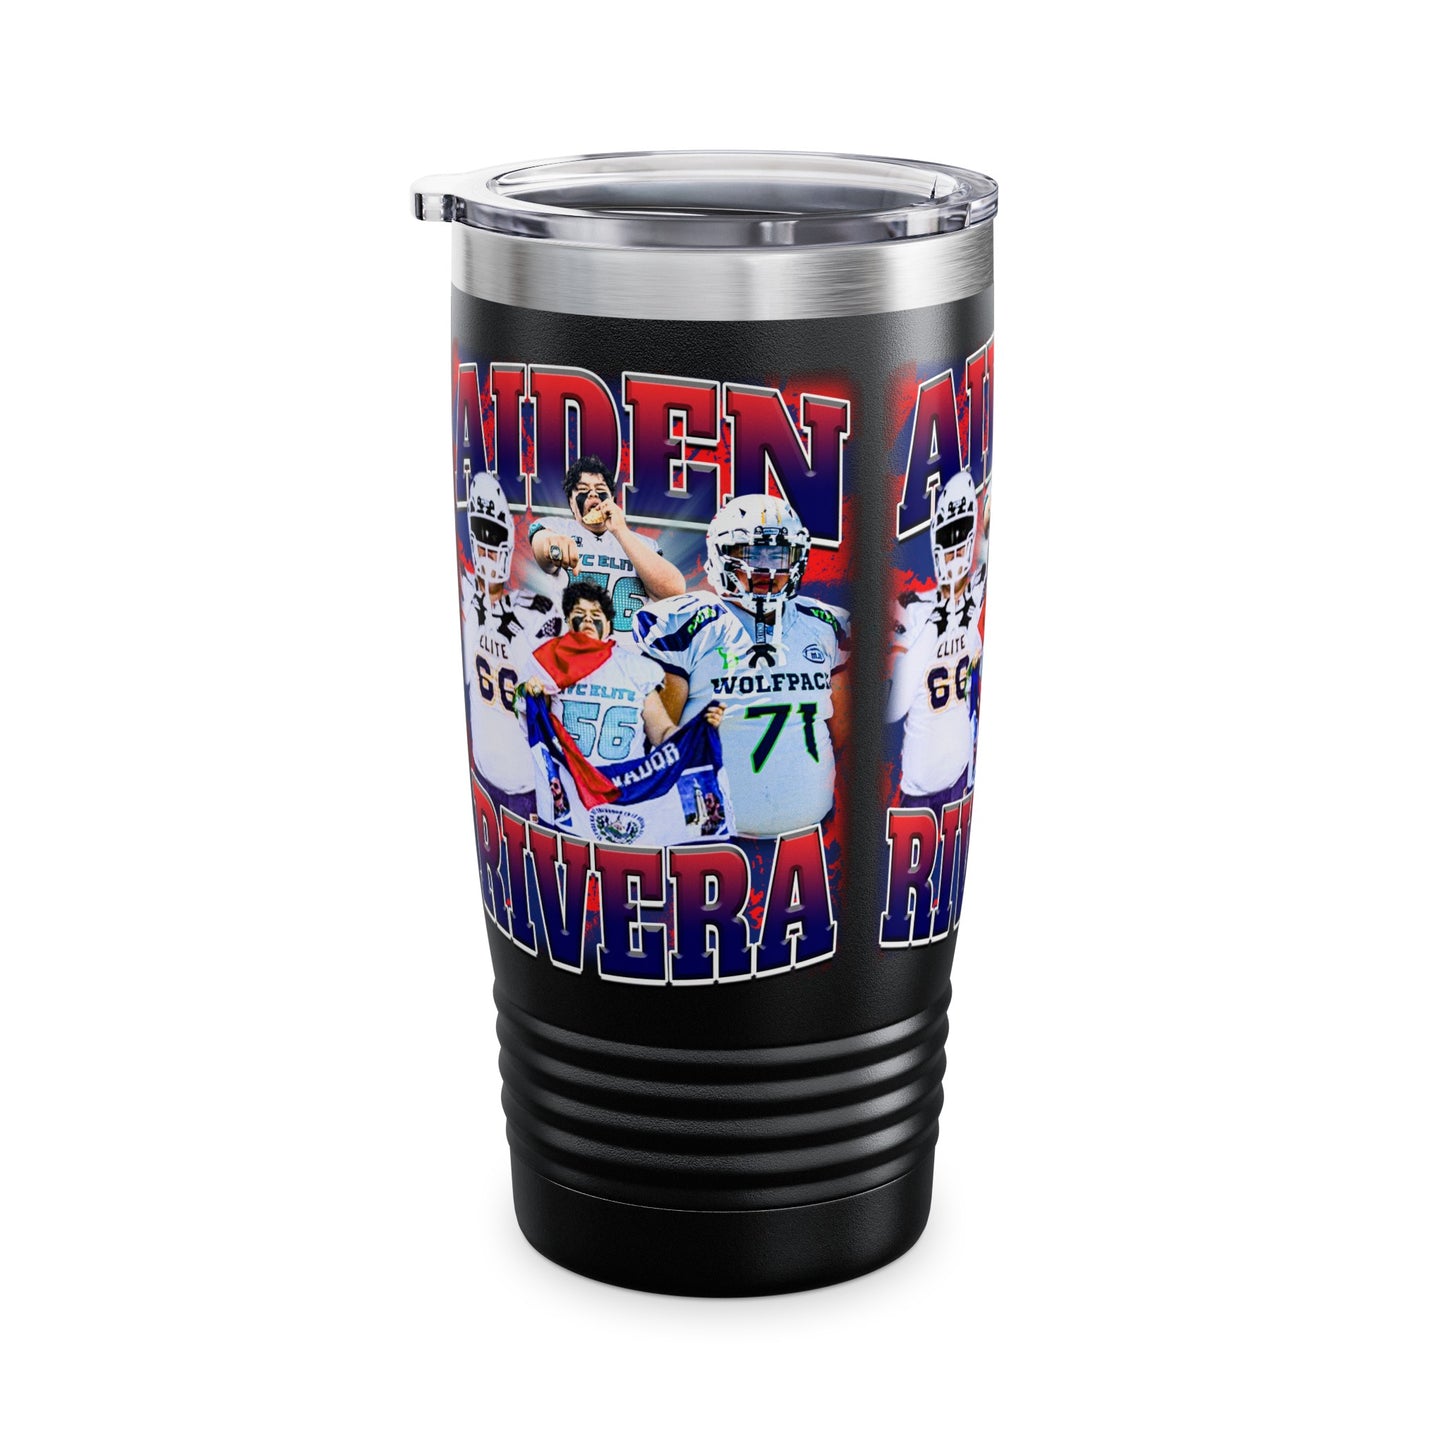 Aiden Rivera Stainless Steal Tumbler